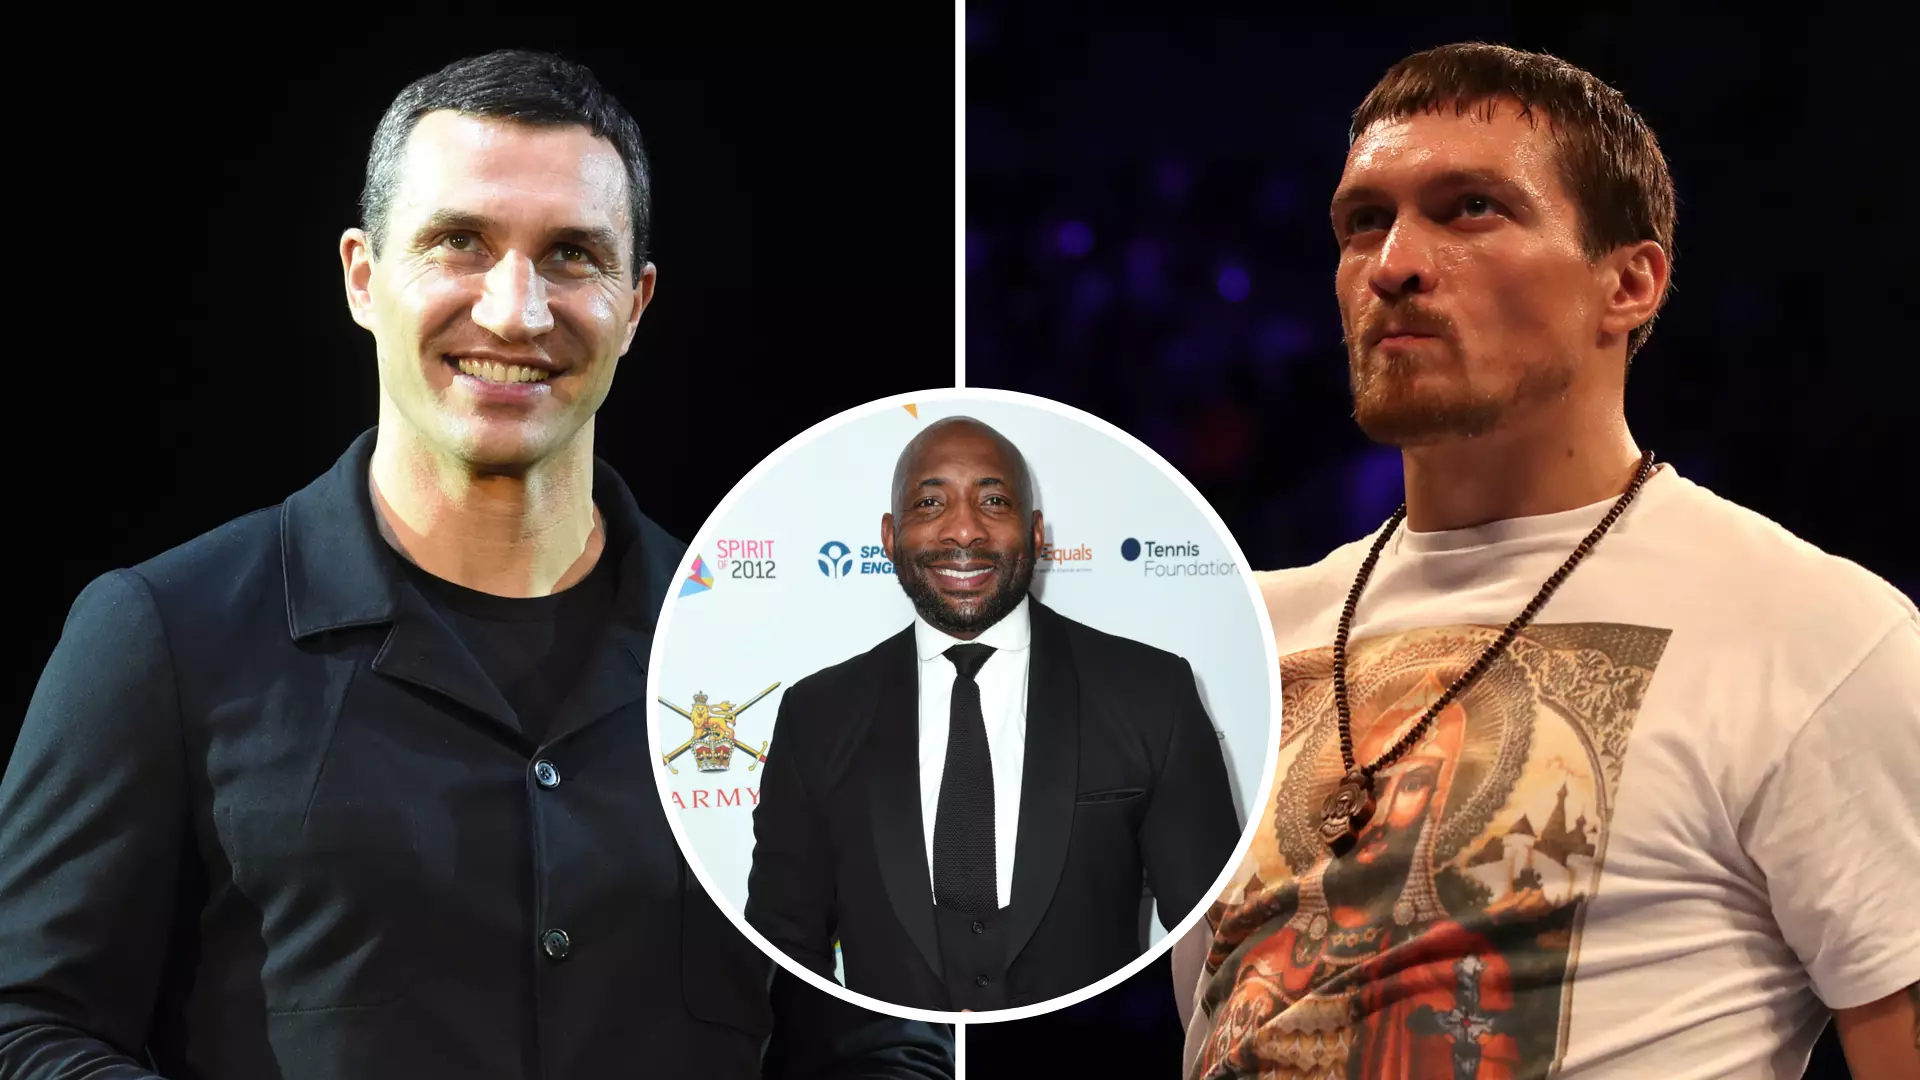 Oleksandr Usyk 'Bossed' Wladimir Klitschko In Sparring To The Point Where He Was 'Slung Out,' Says Johnny Nelson